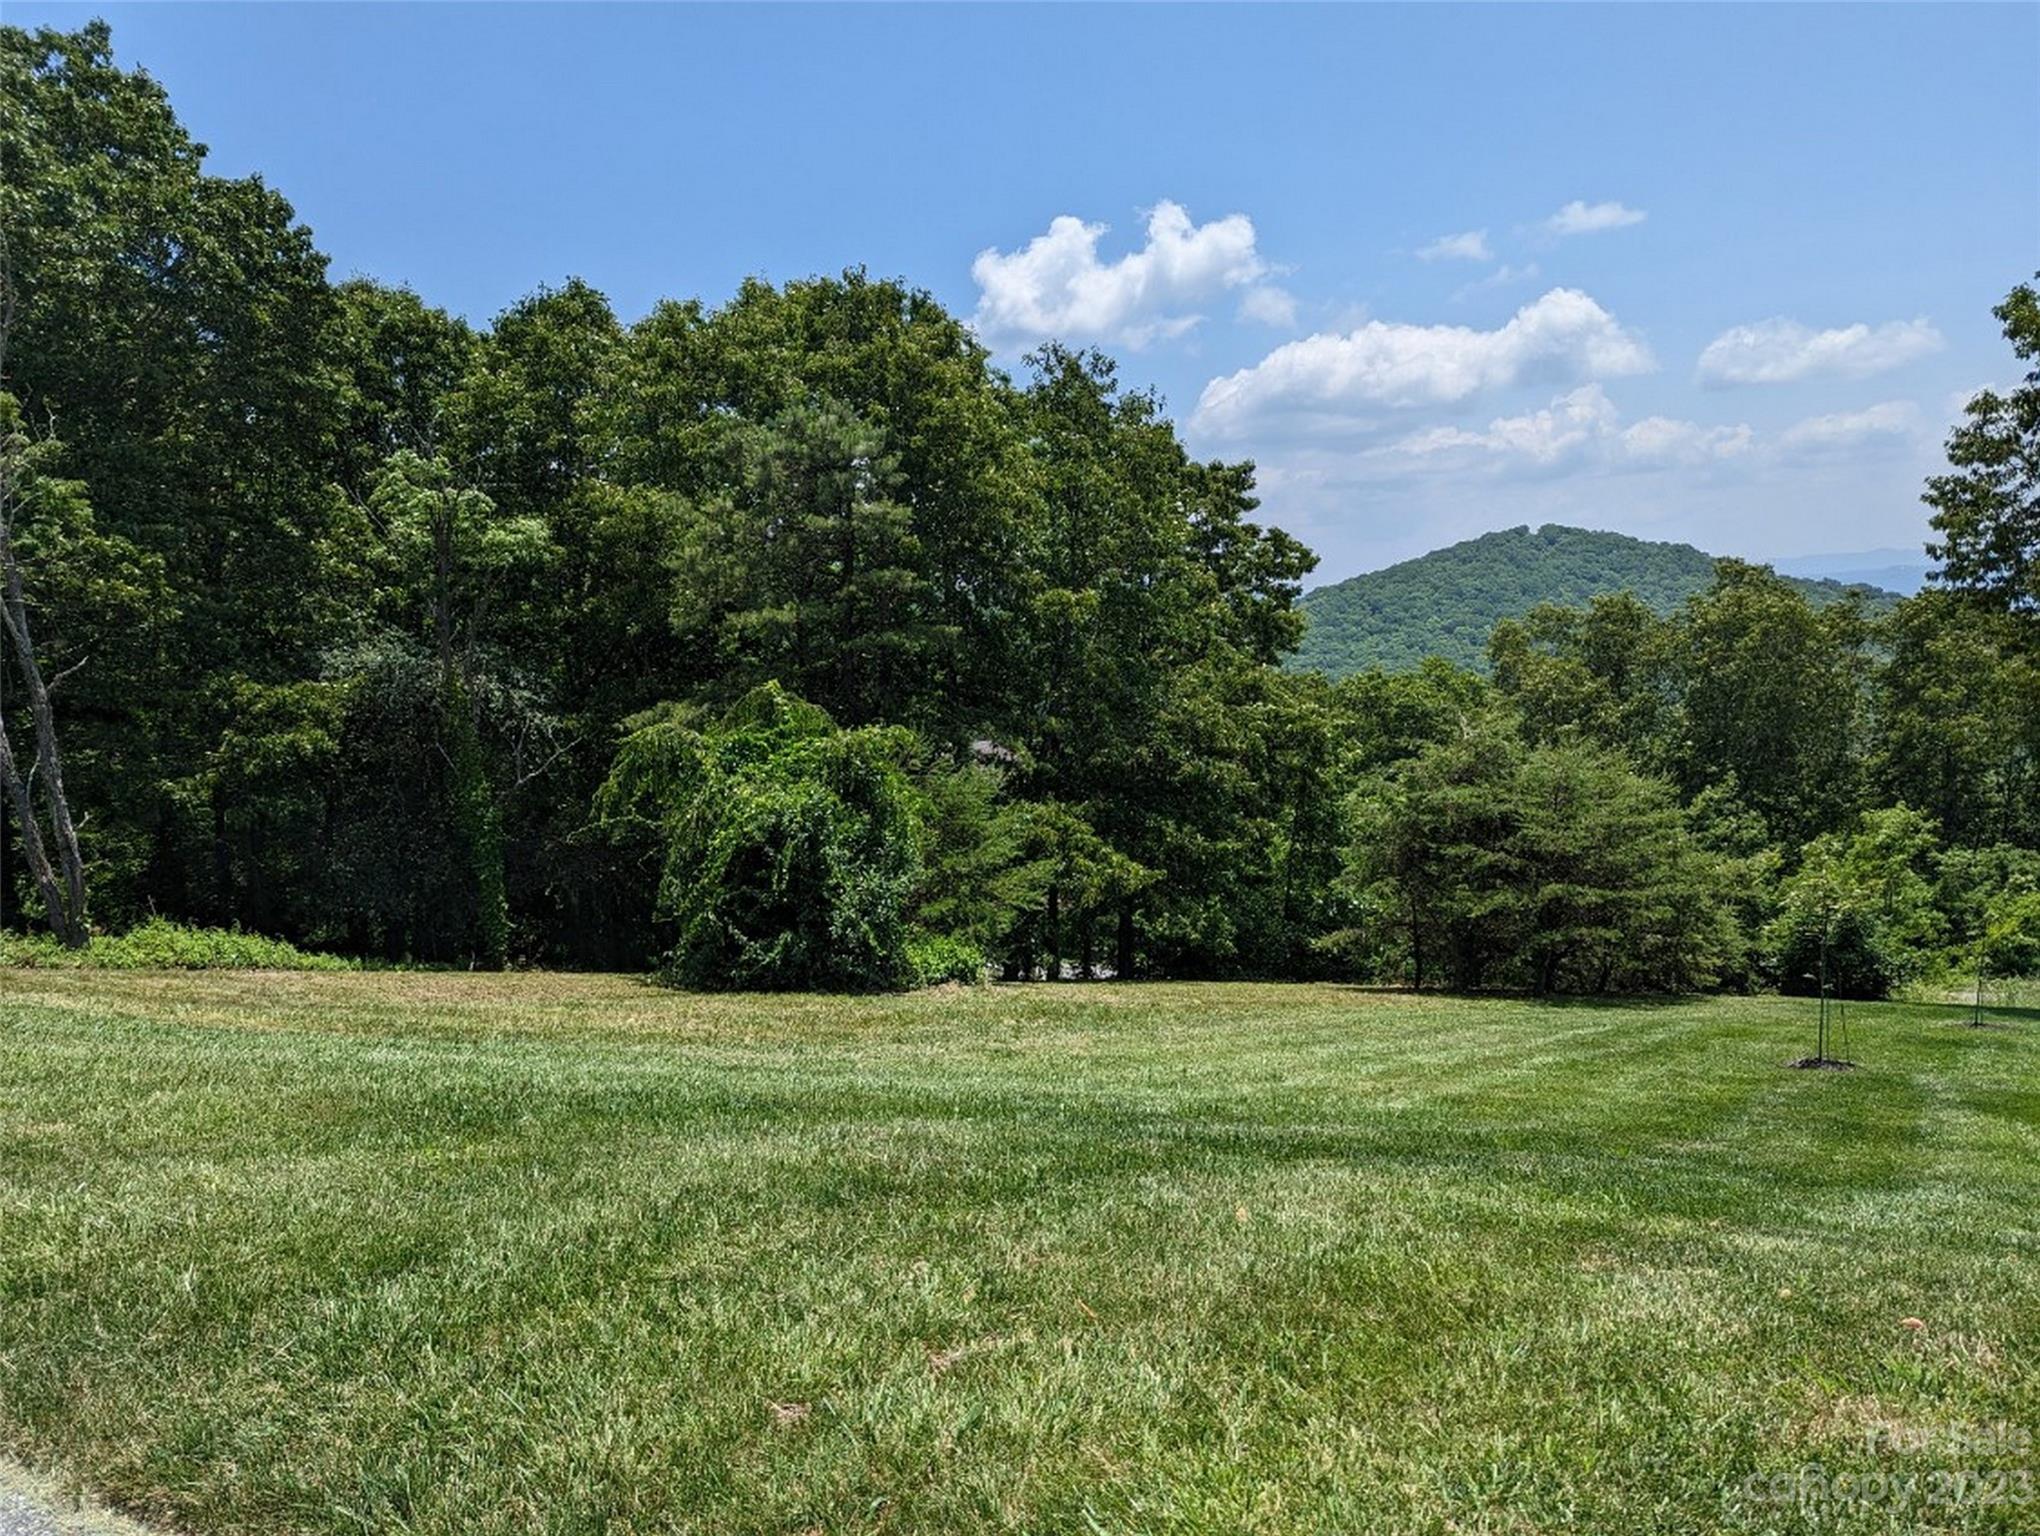 a view of a grassy field with trees in the background